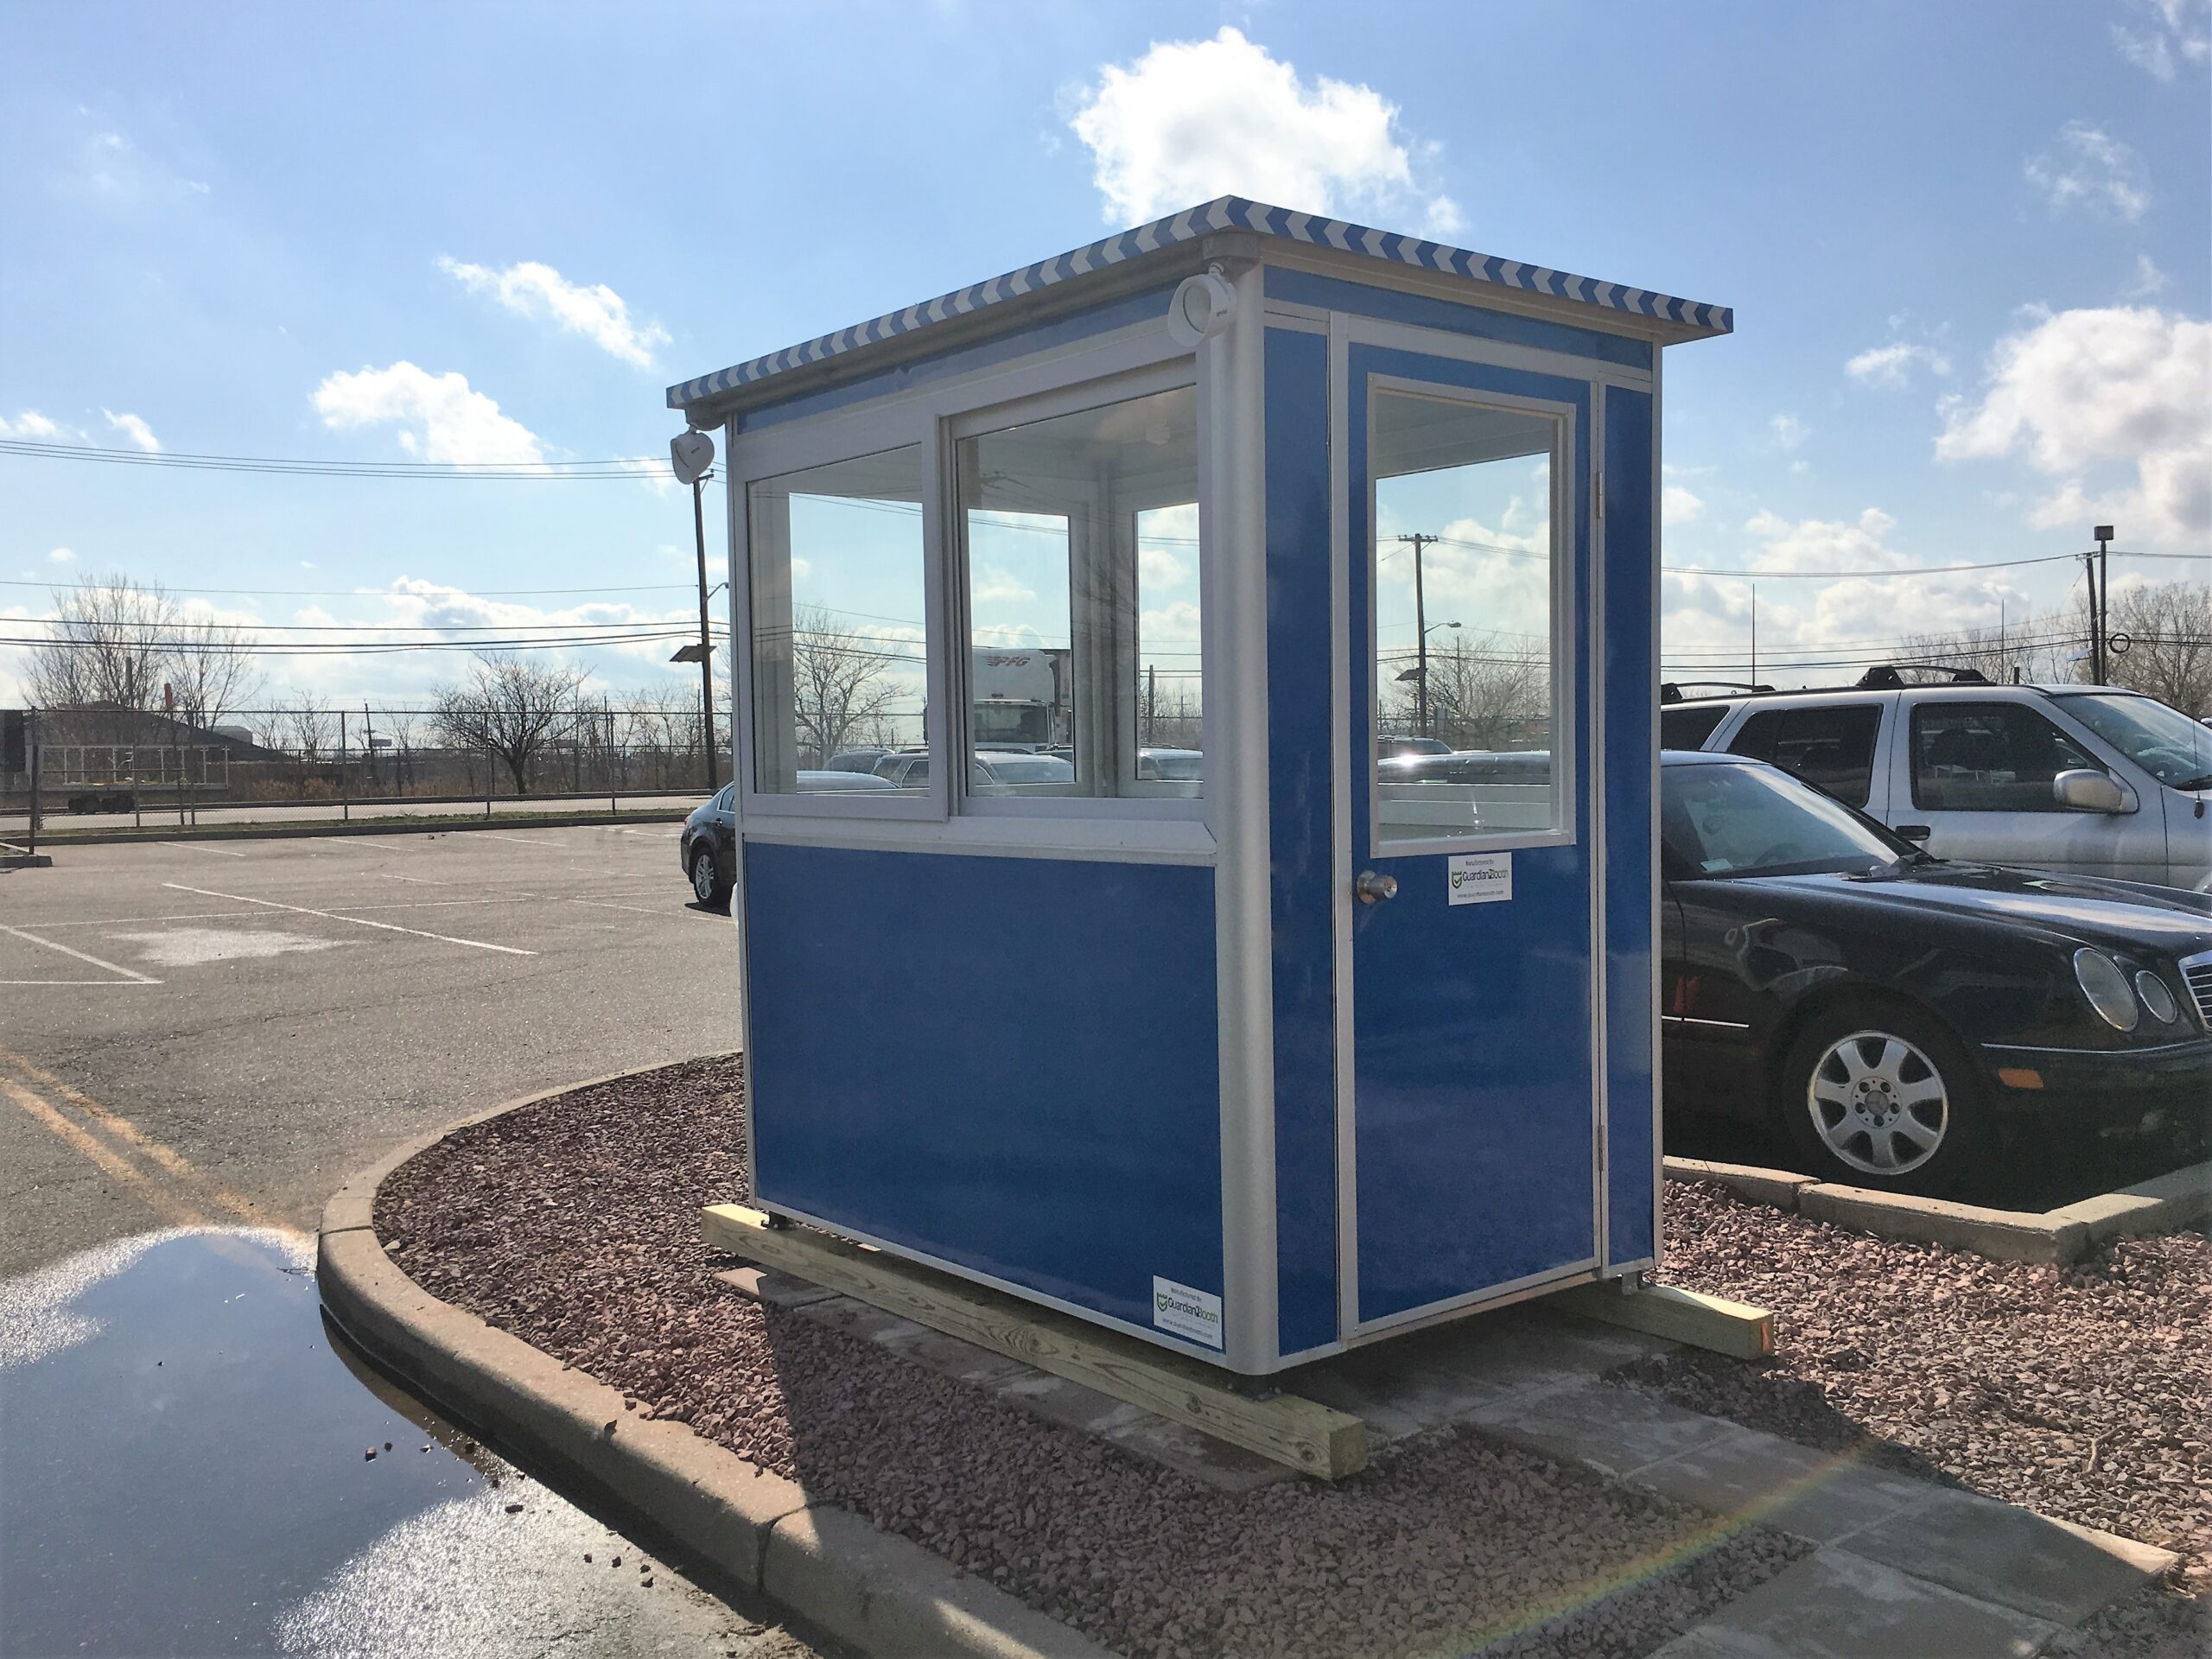 attendant booth located in Elizabeth